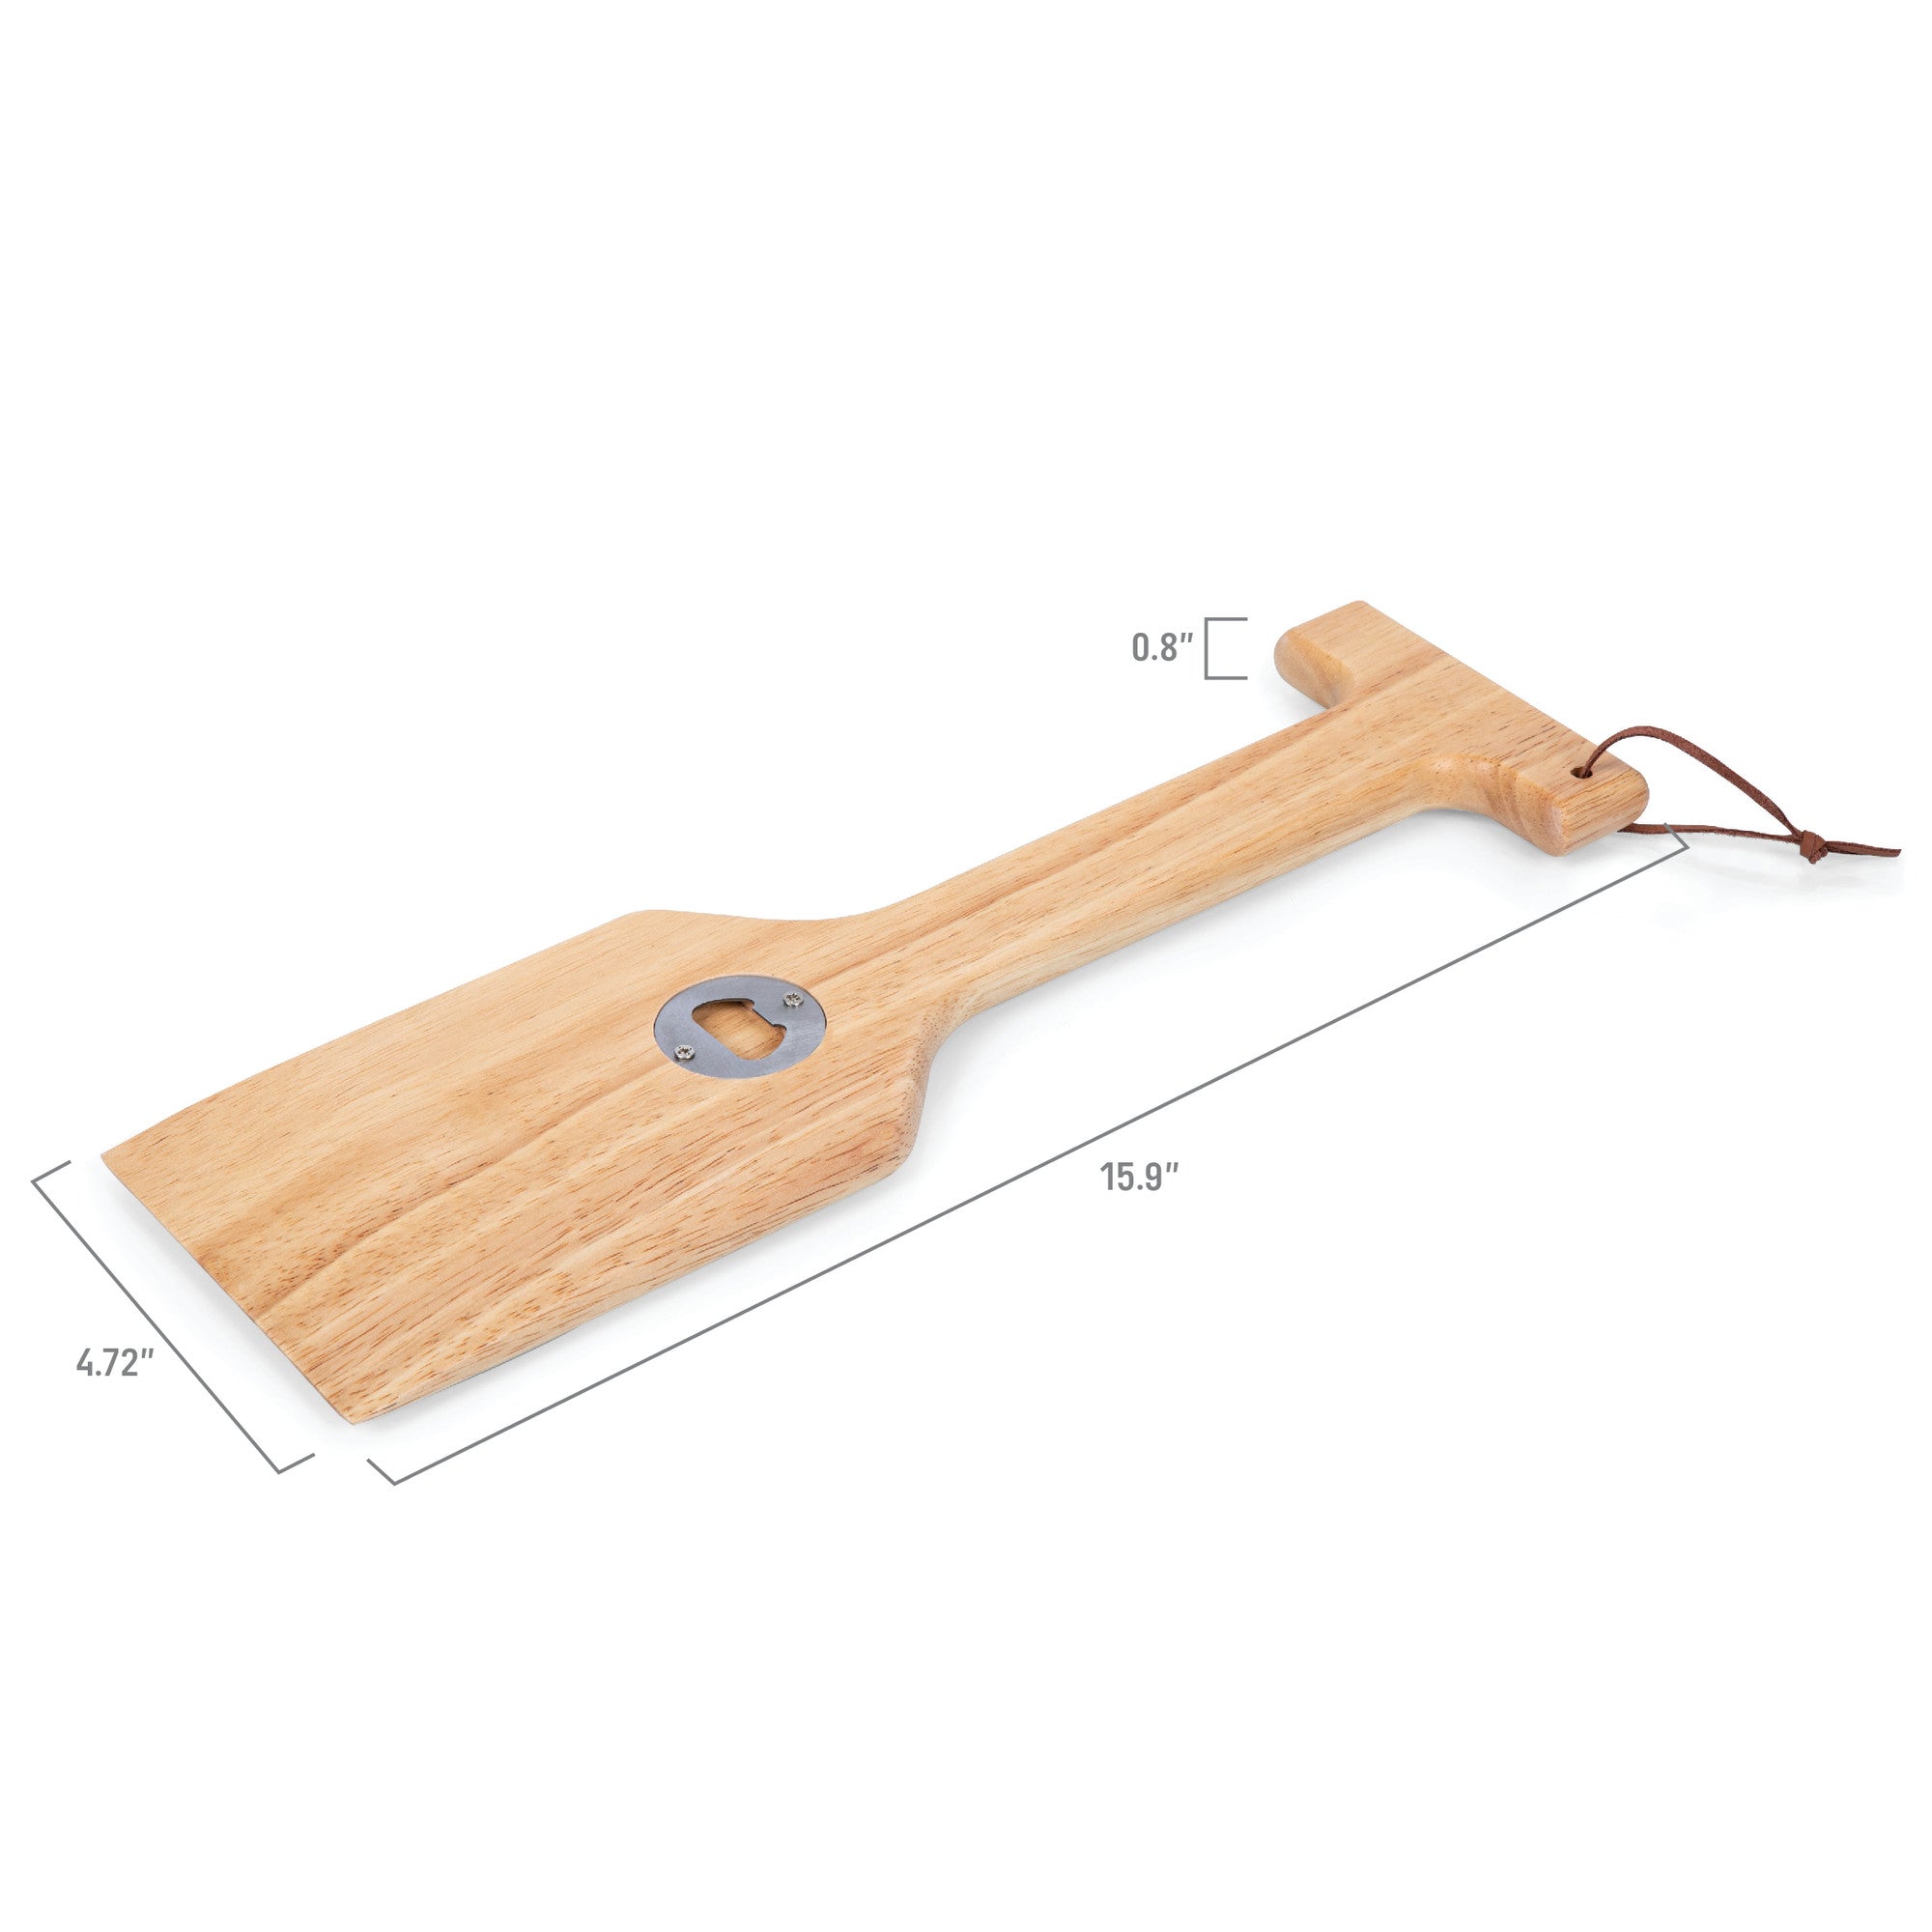 Penn State Nittany Lions - Hardwood BBQ Grill Scraper with Bottle Opener